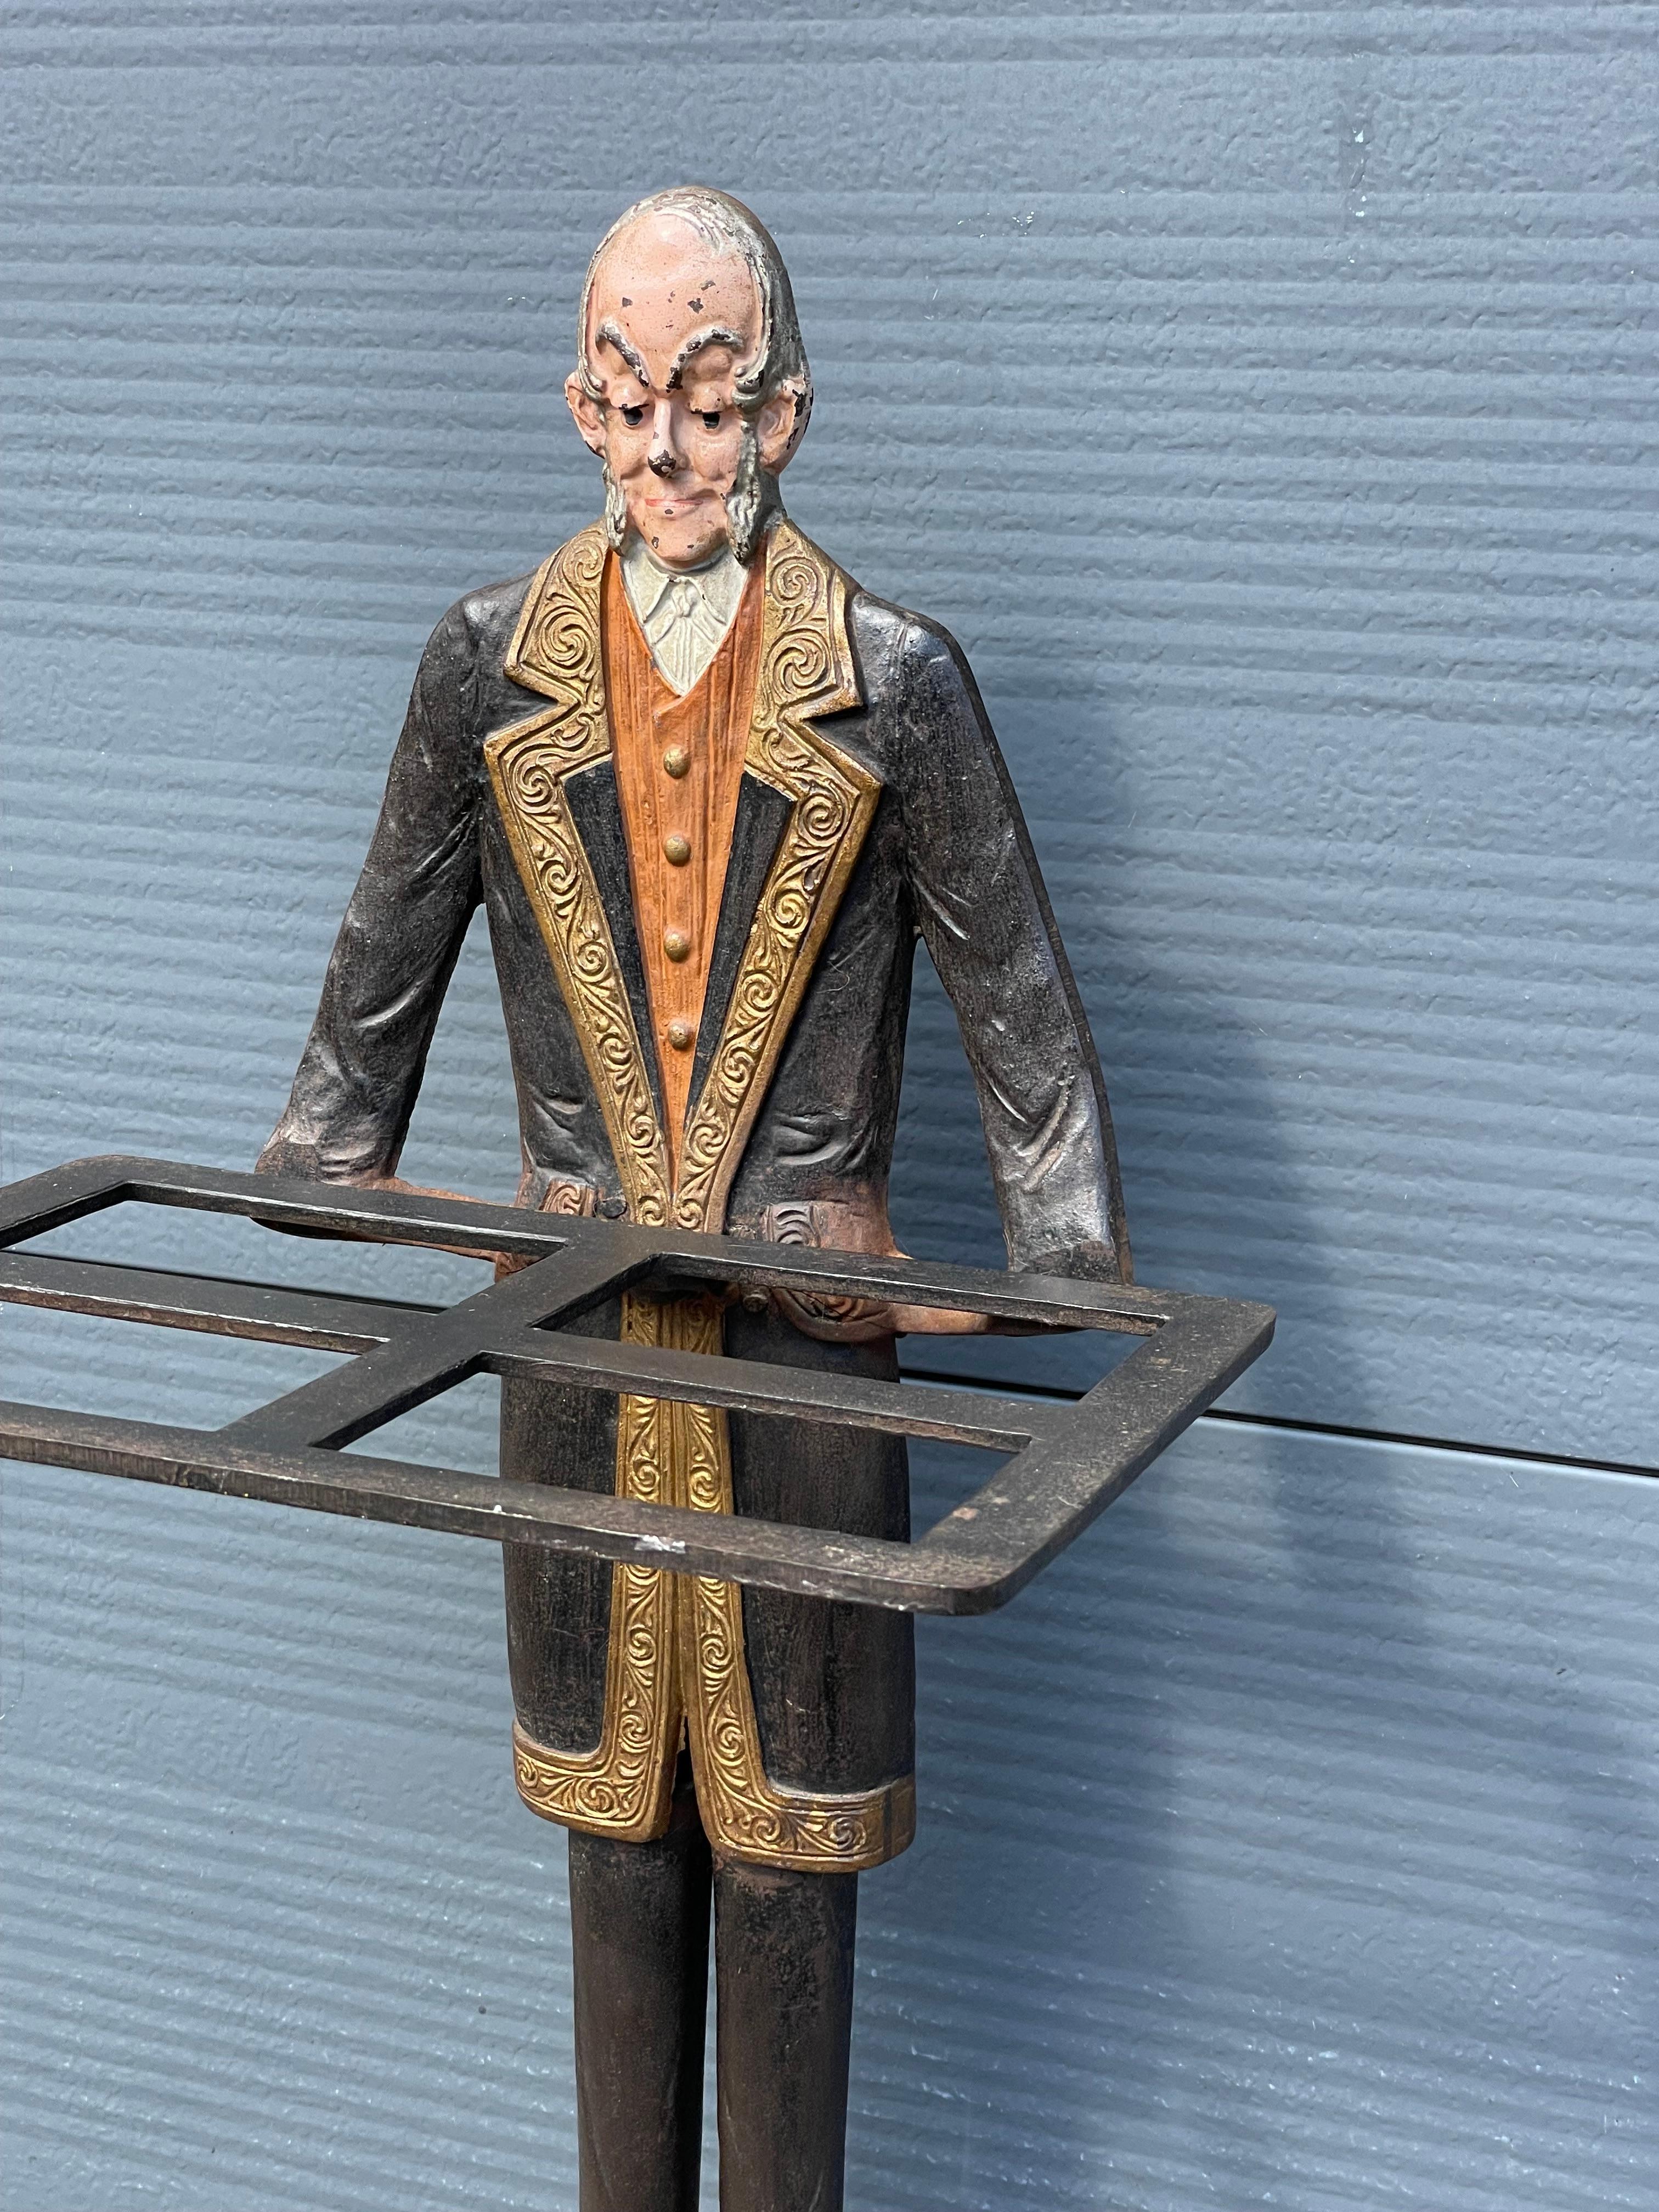 Art Deco Era, Cast Iron Tray or Umbrella Stand w. Painted Servant Sculpture 1920 For Sale 8